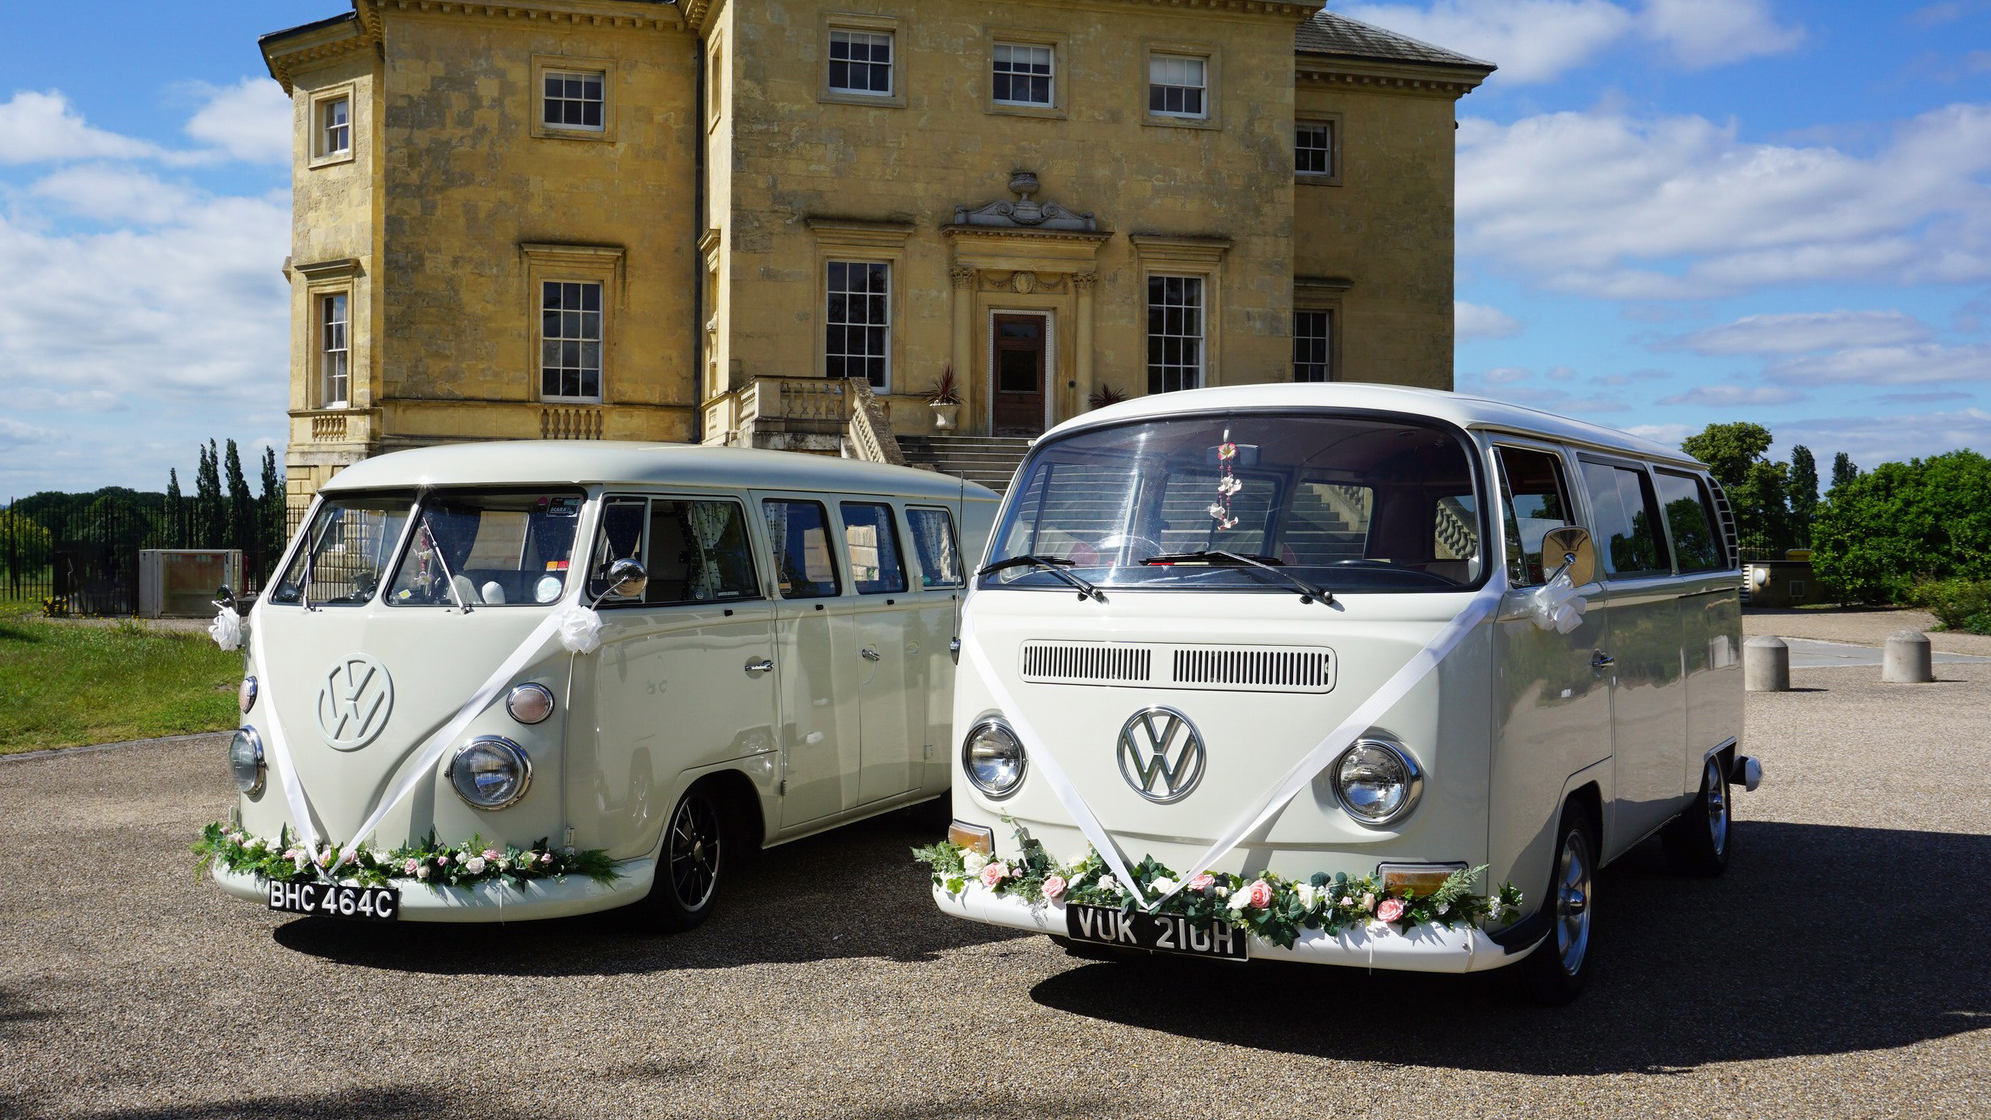 Two Classic VW Campervans decorated with a green foliage arrangement on front bumpers and white ribbons across the front